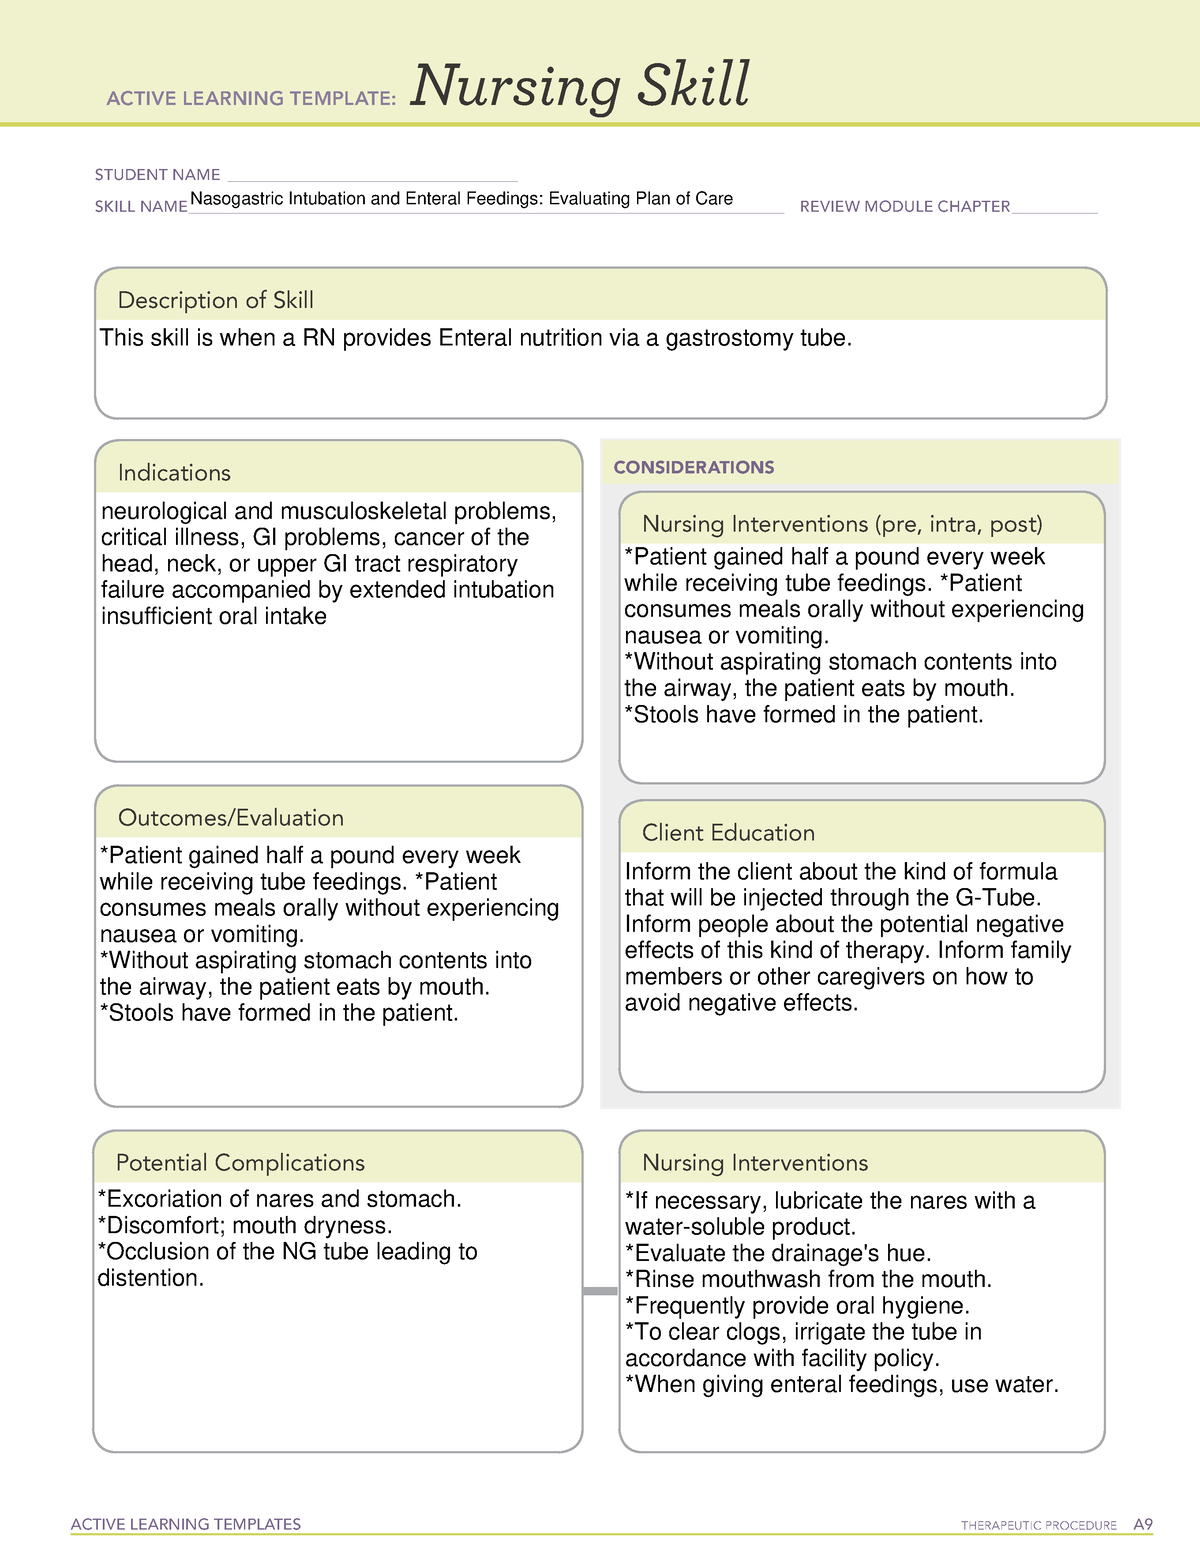 NR446 ALT Nursing Skill - ACTIVE LEARNING TEMPLATES THERAPEUTIC ...